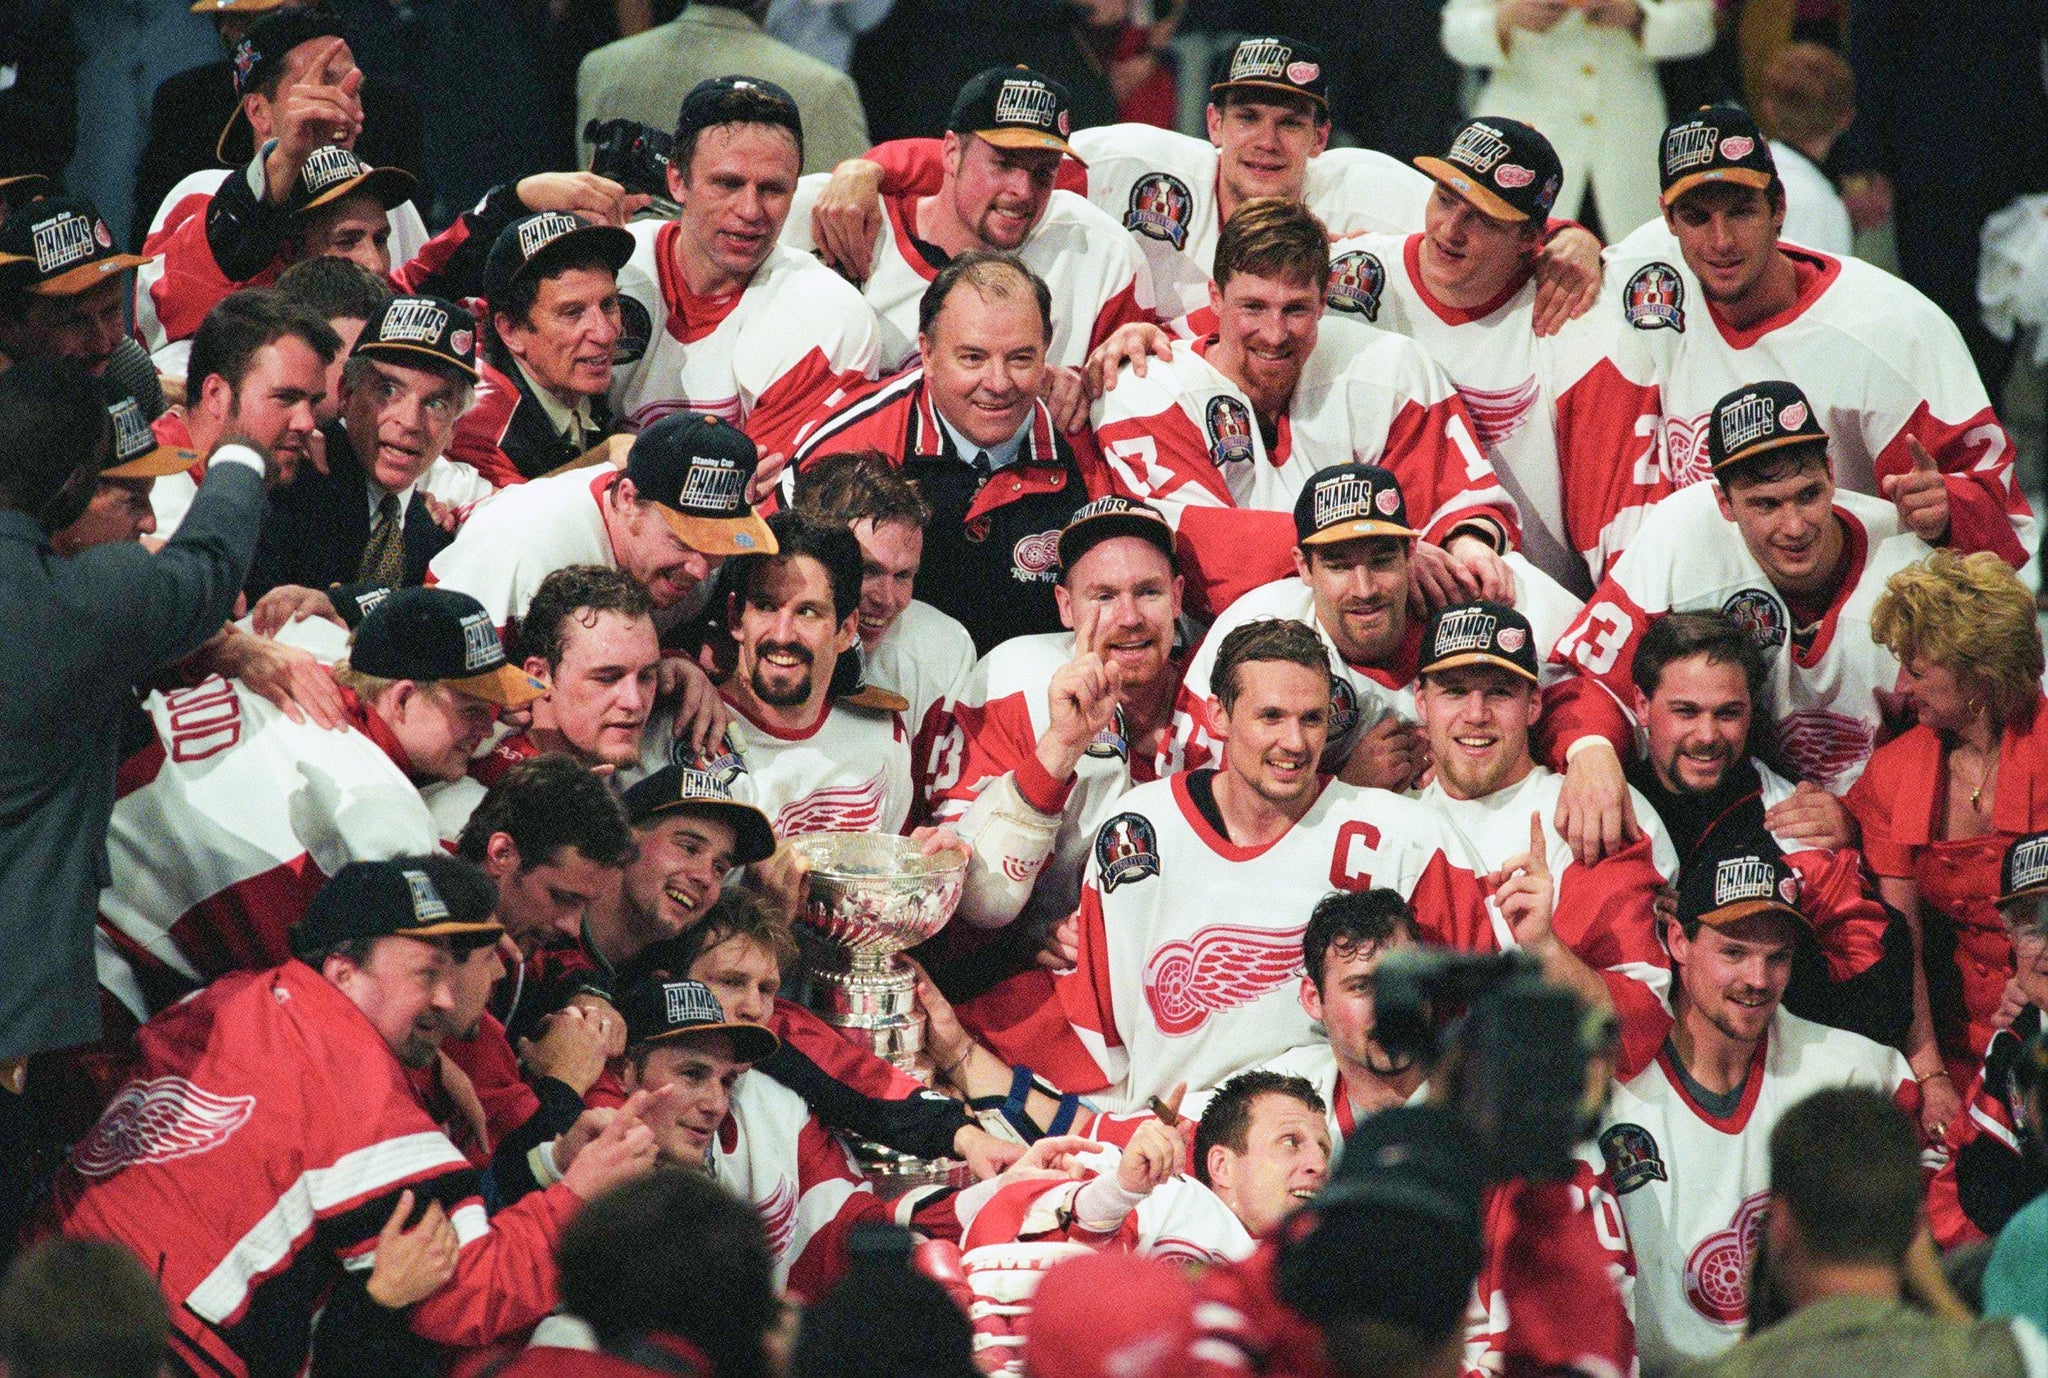 1997 Stanley Cup Championship 25th Anniversary Celebration